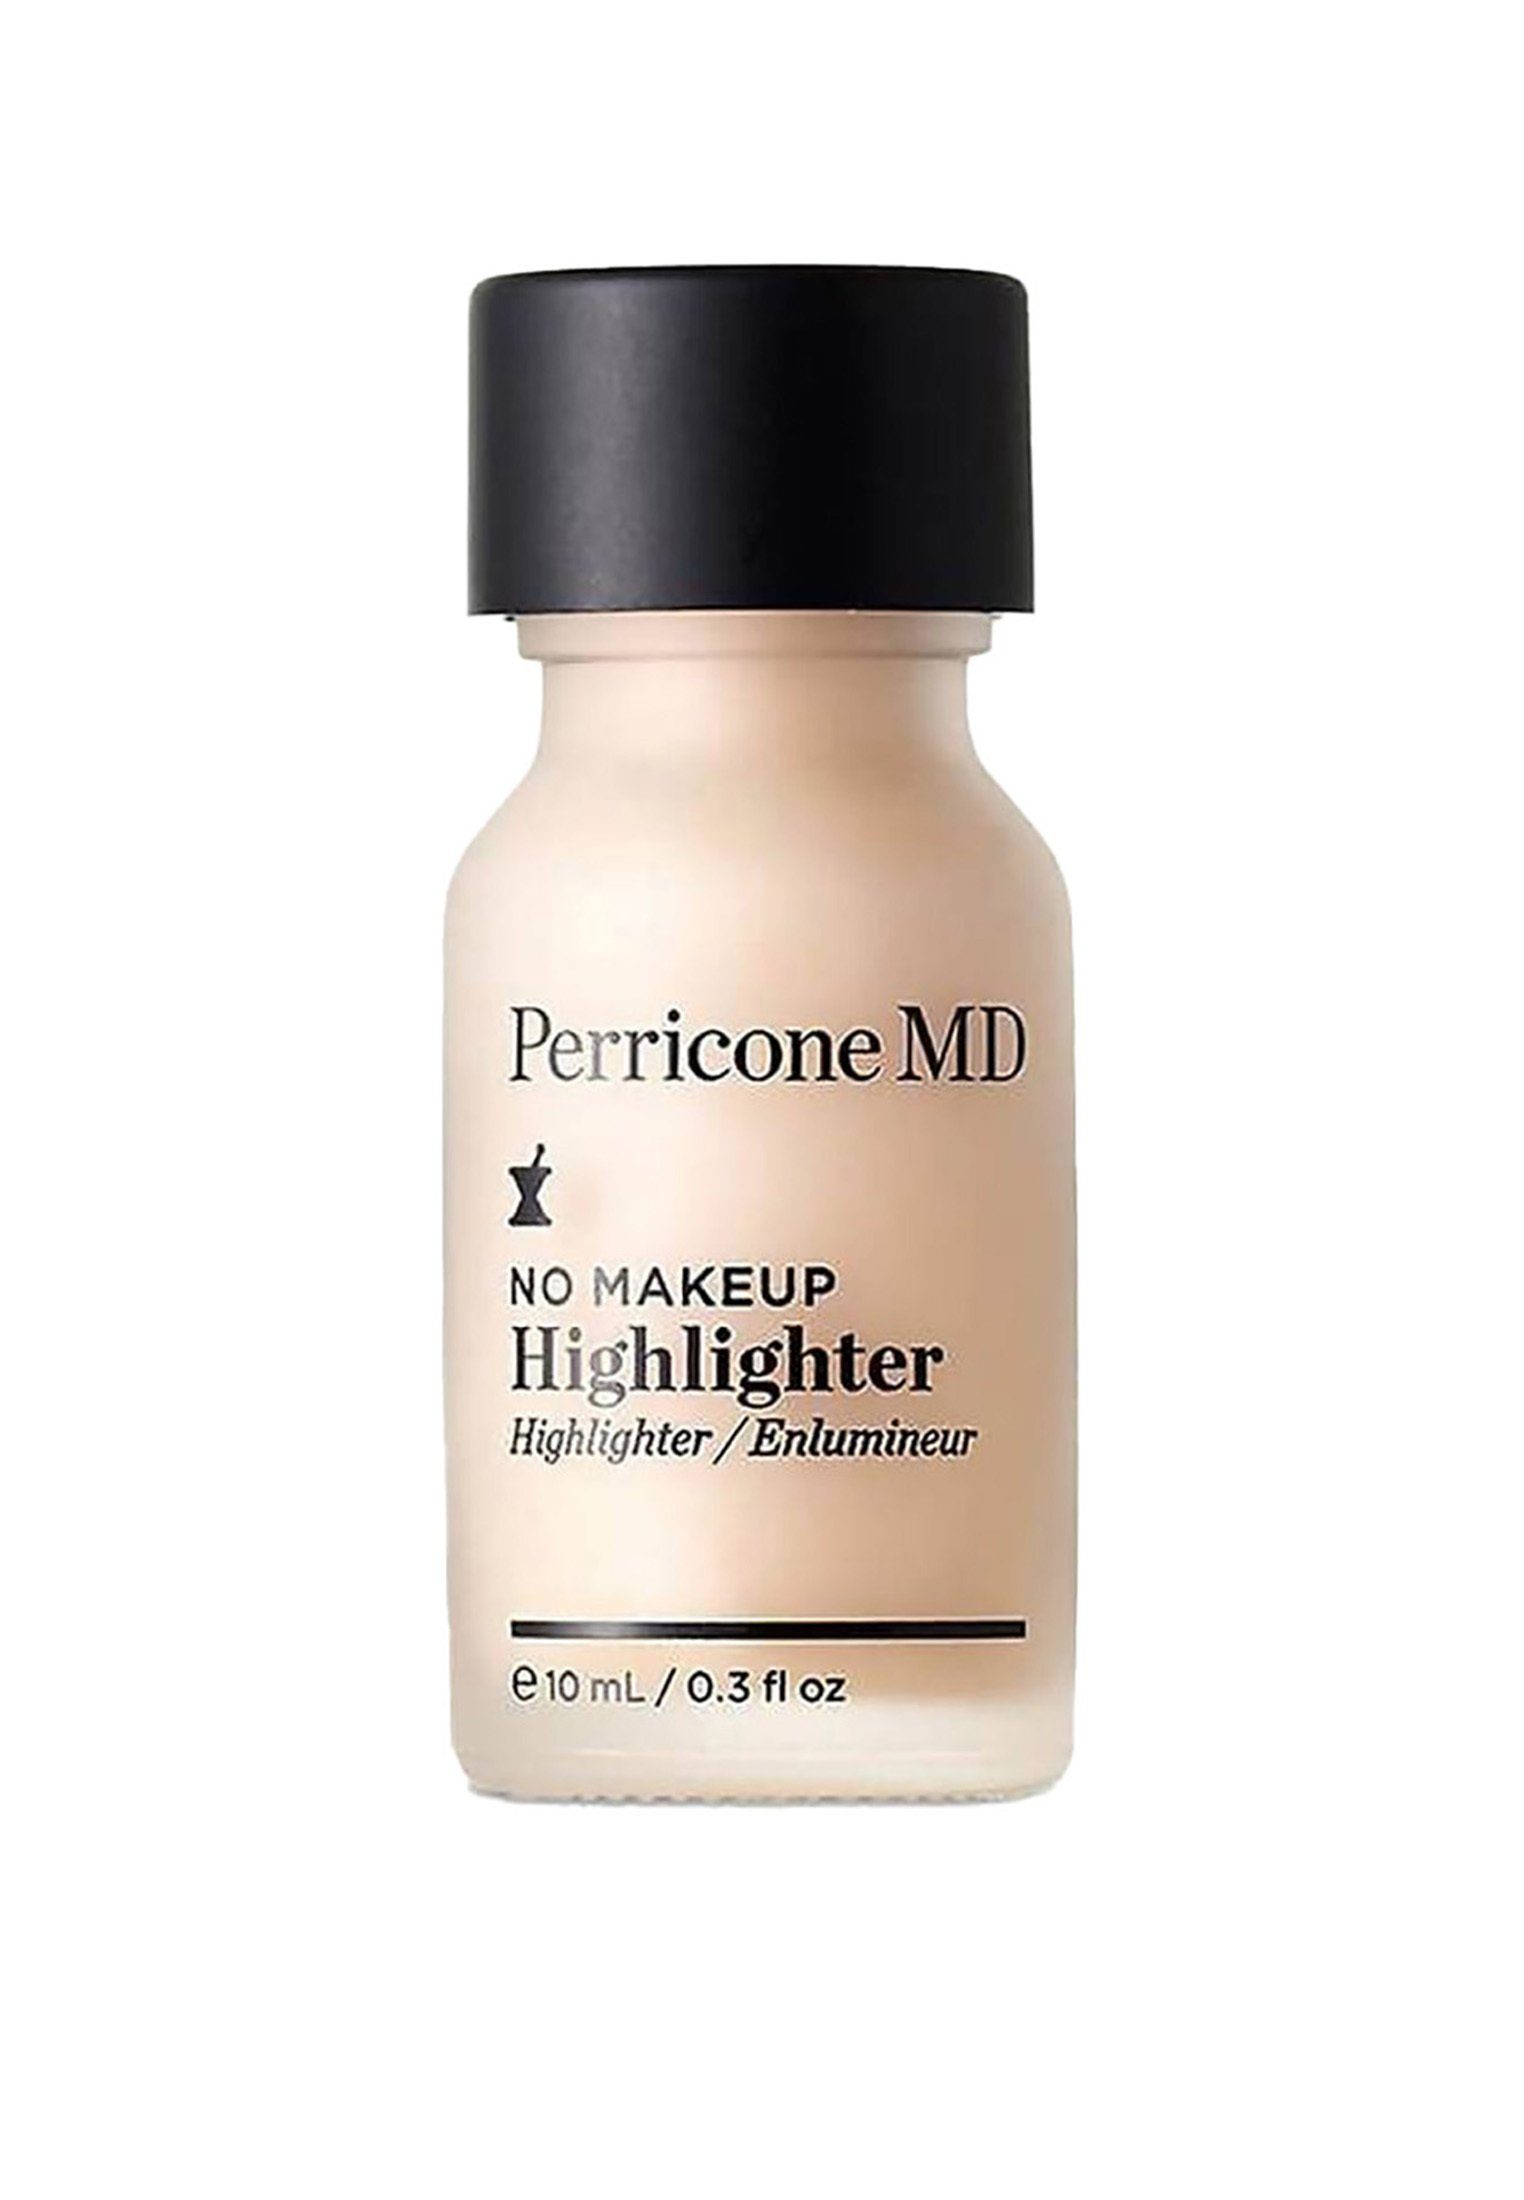 PERRICONE Highlighter Highlighter No Makeup Highlighter PERRICONE